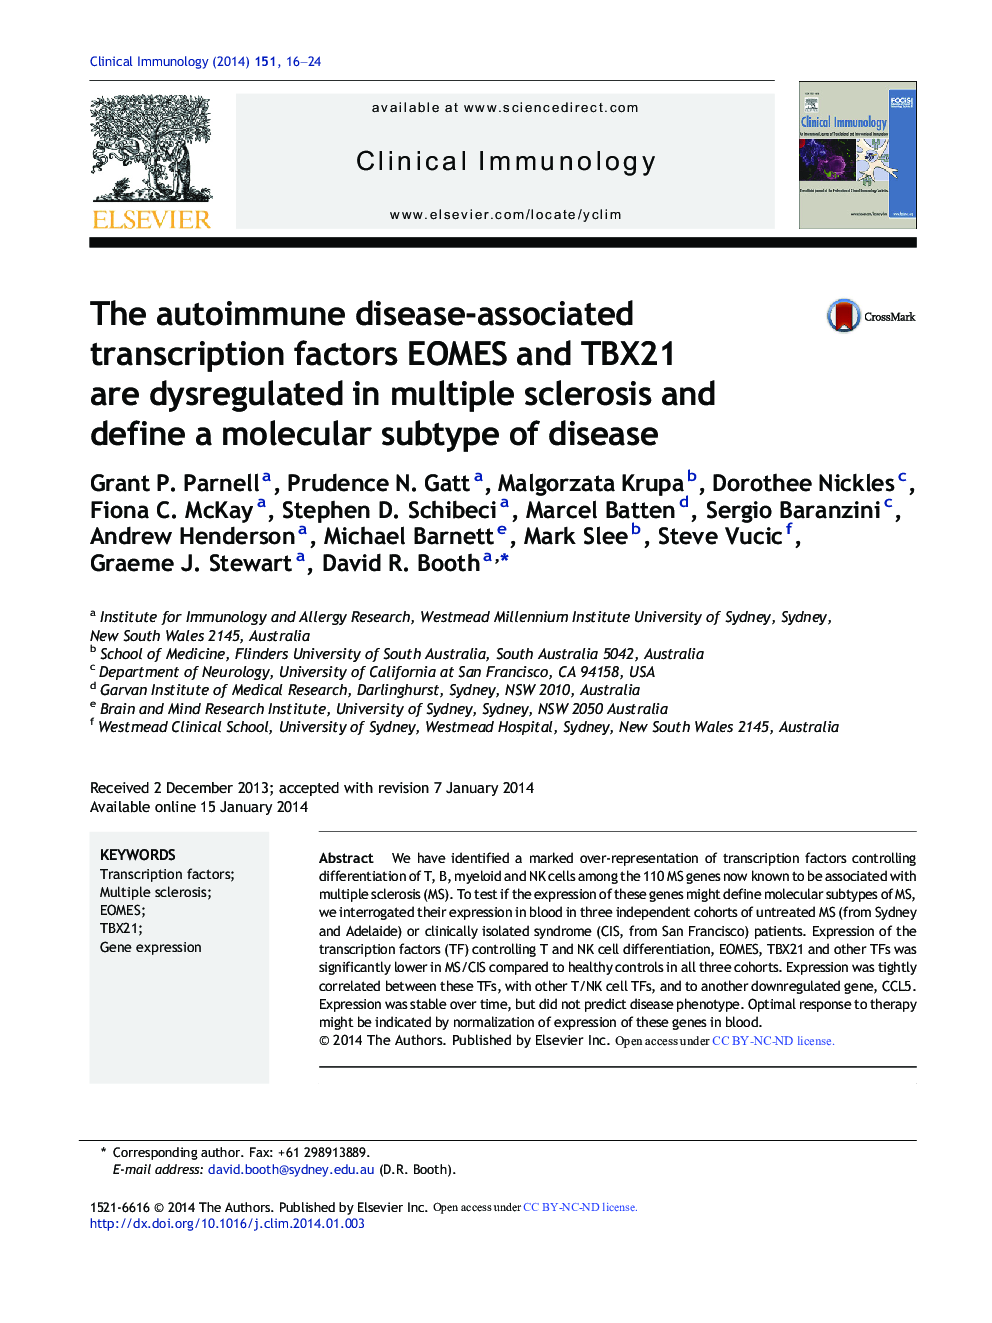 The autoimmune disease-associated transcription factors EOMES and TBX21 are dysregulated in multiple sclerosis and define a molecular subtype of disease